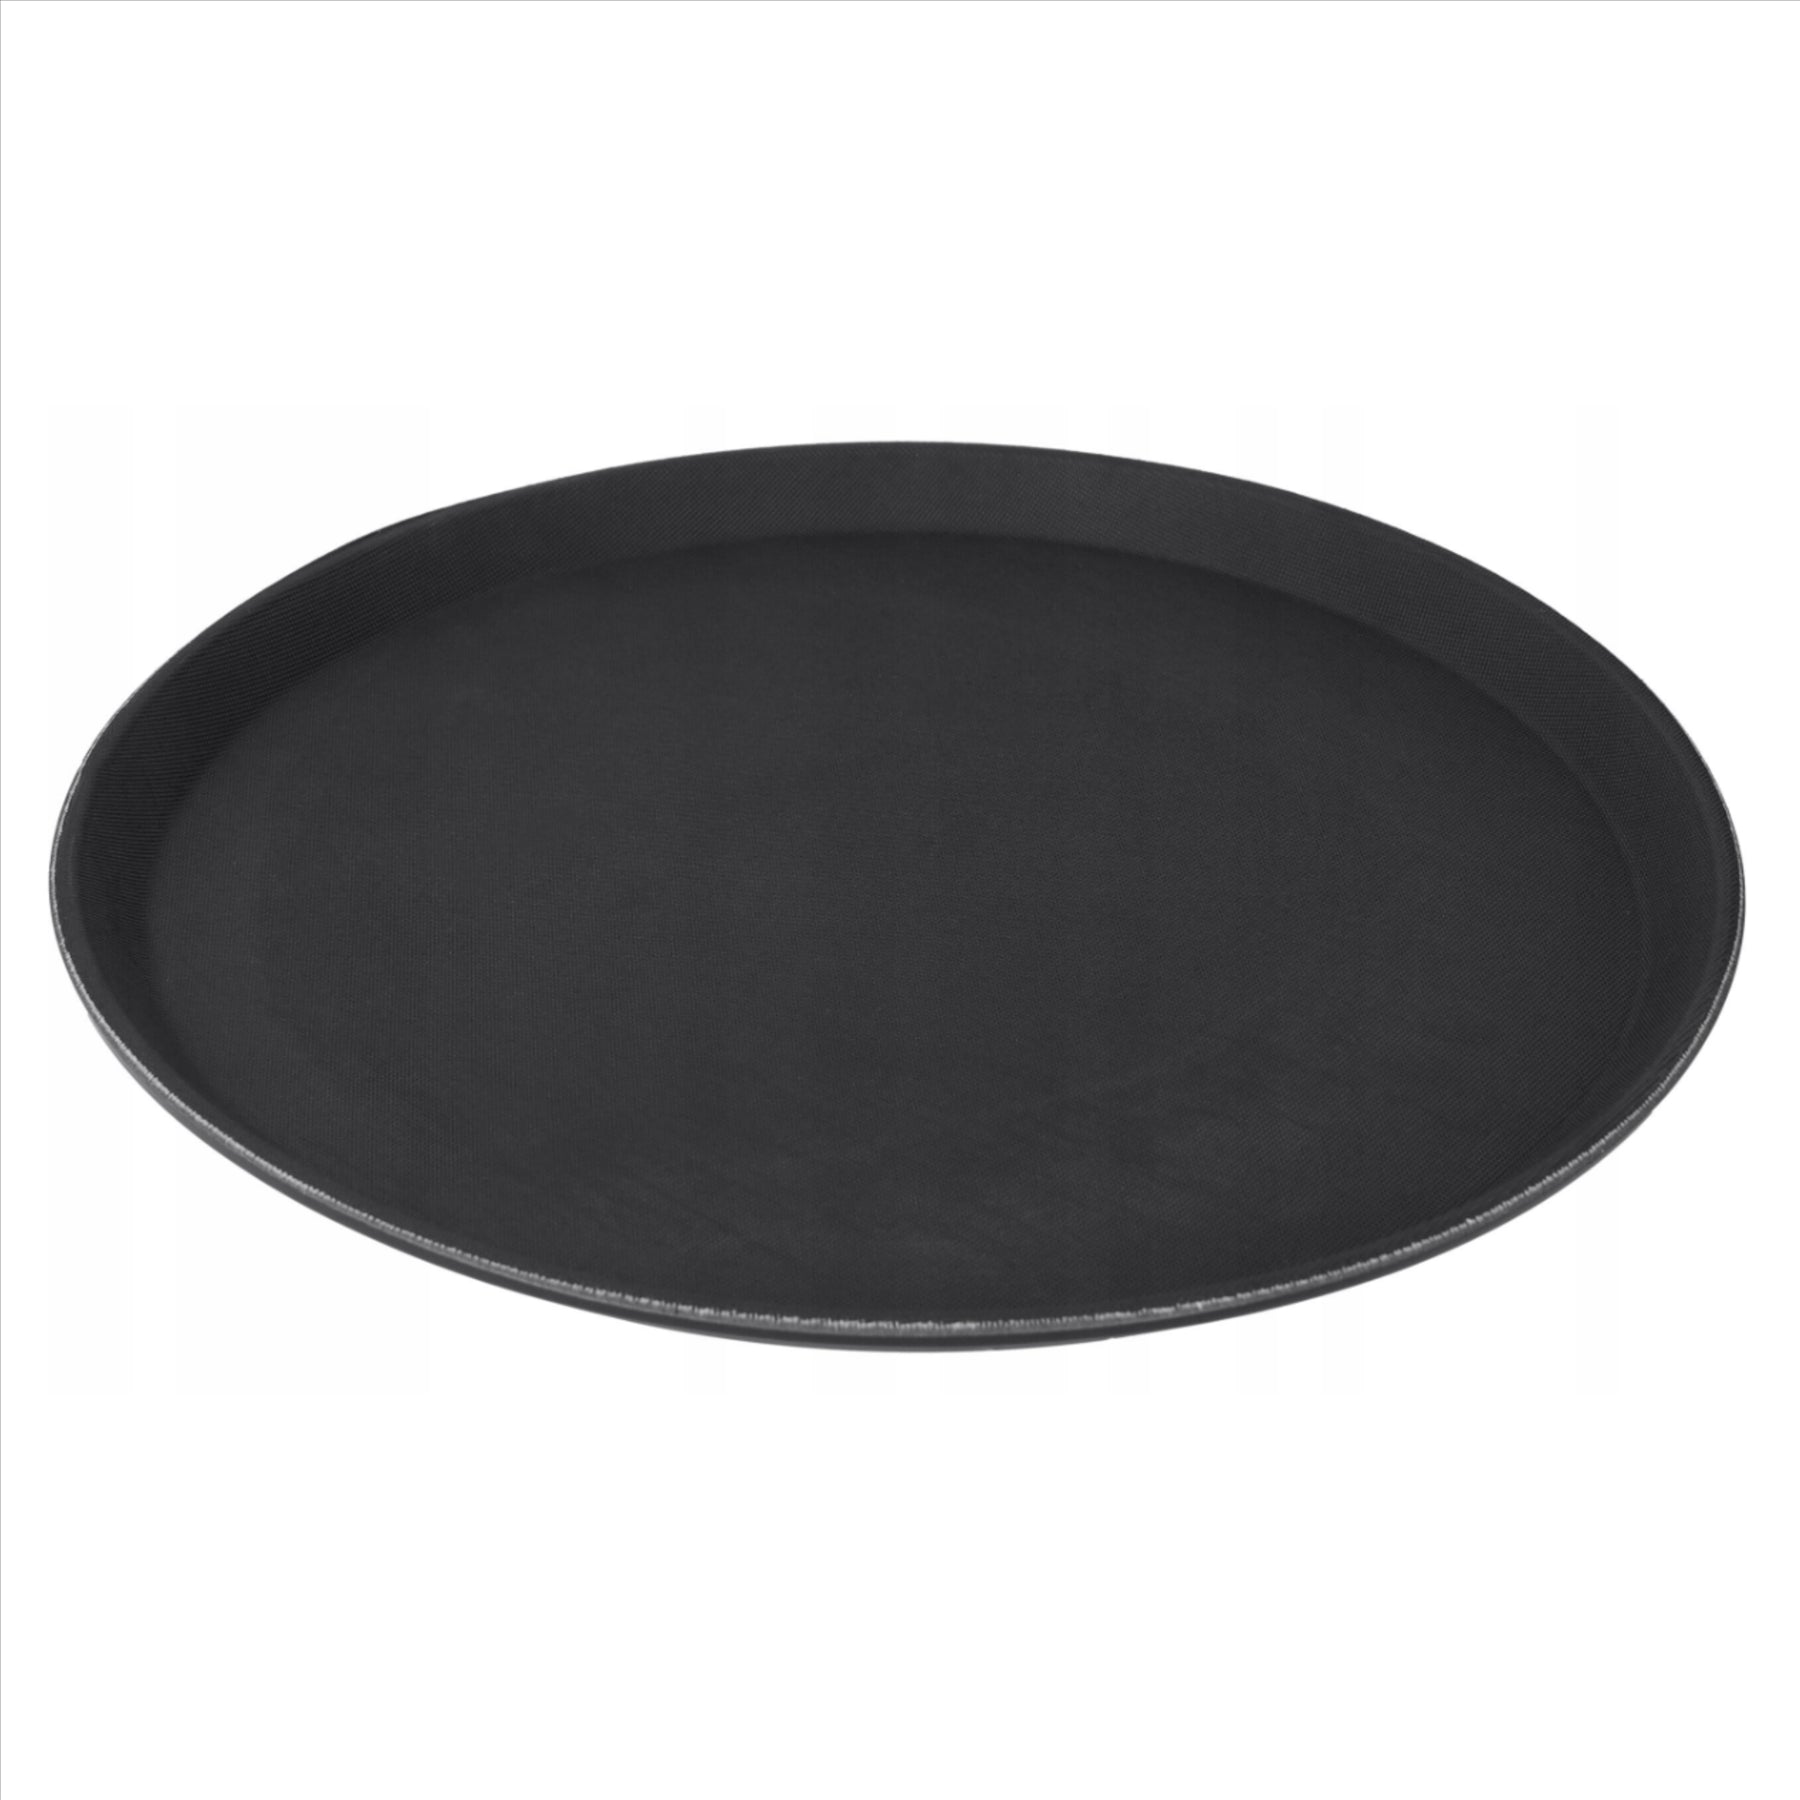 Non-Slip Black Textured Serving Tray by GEEZY - The Magic Toy Shop